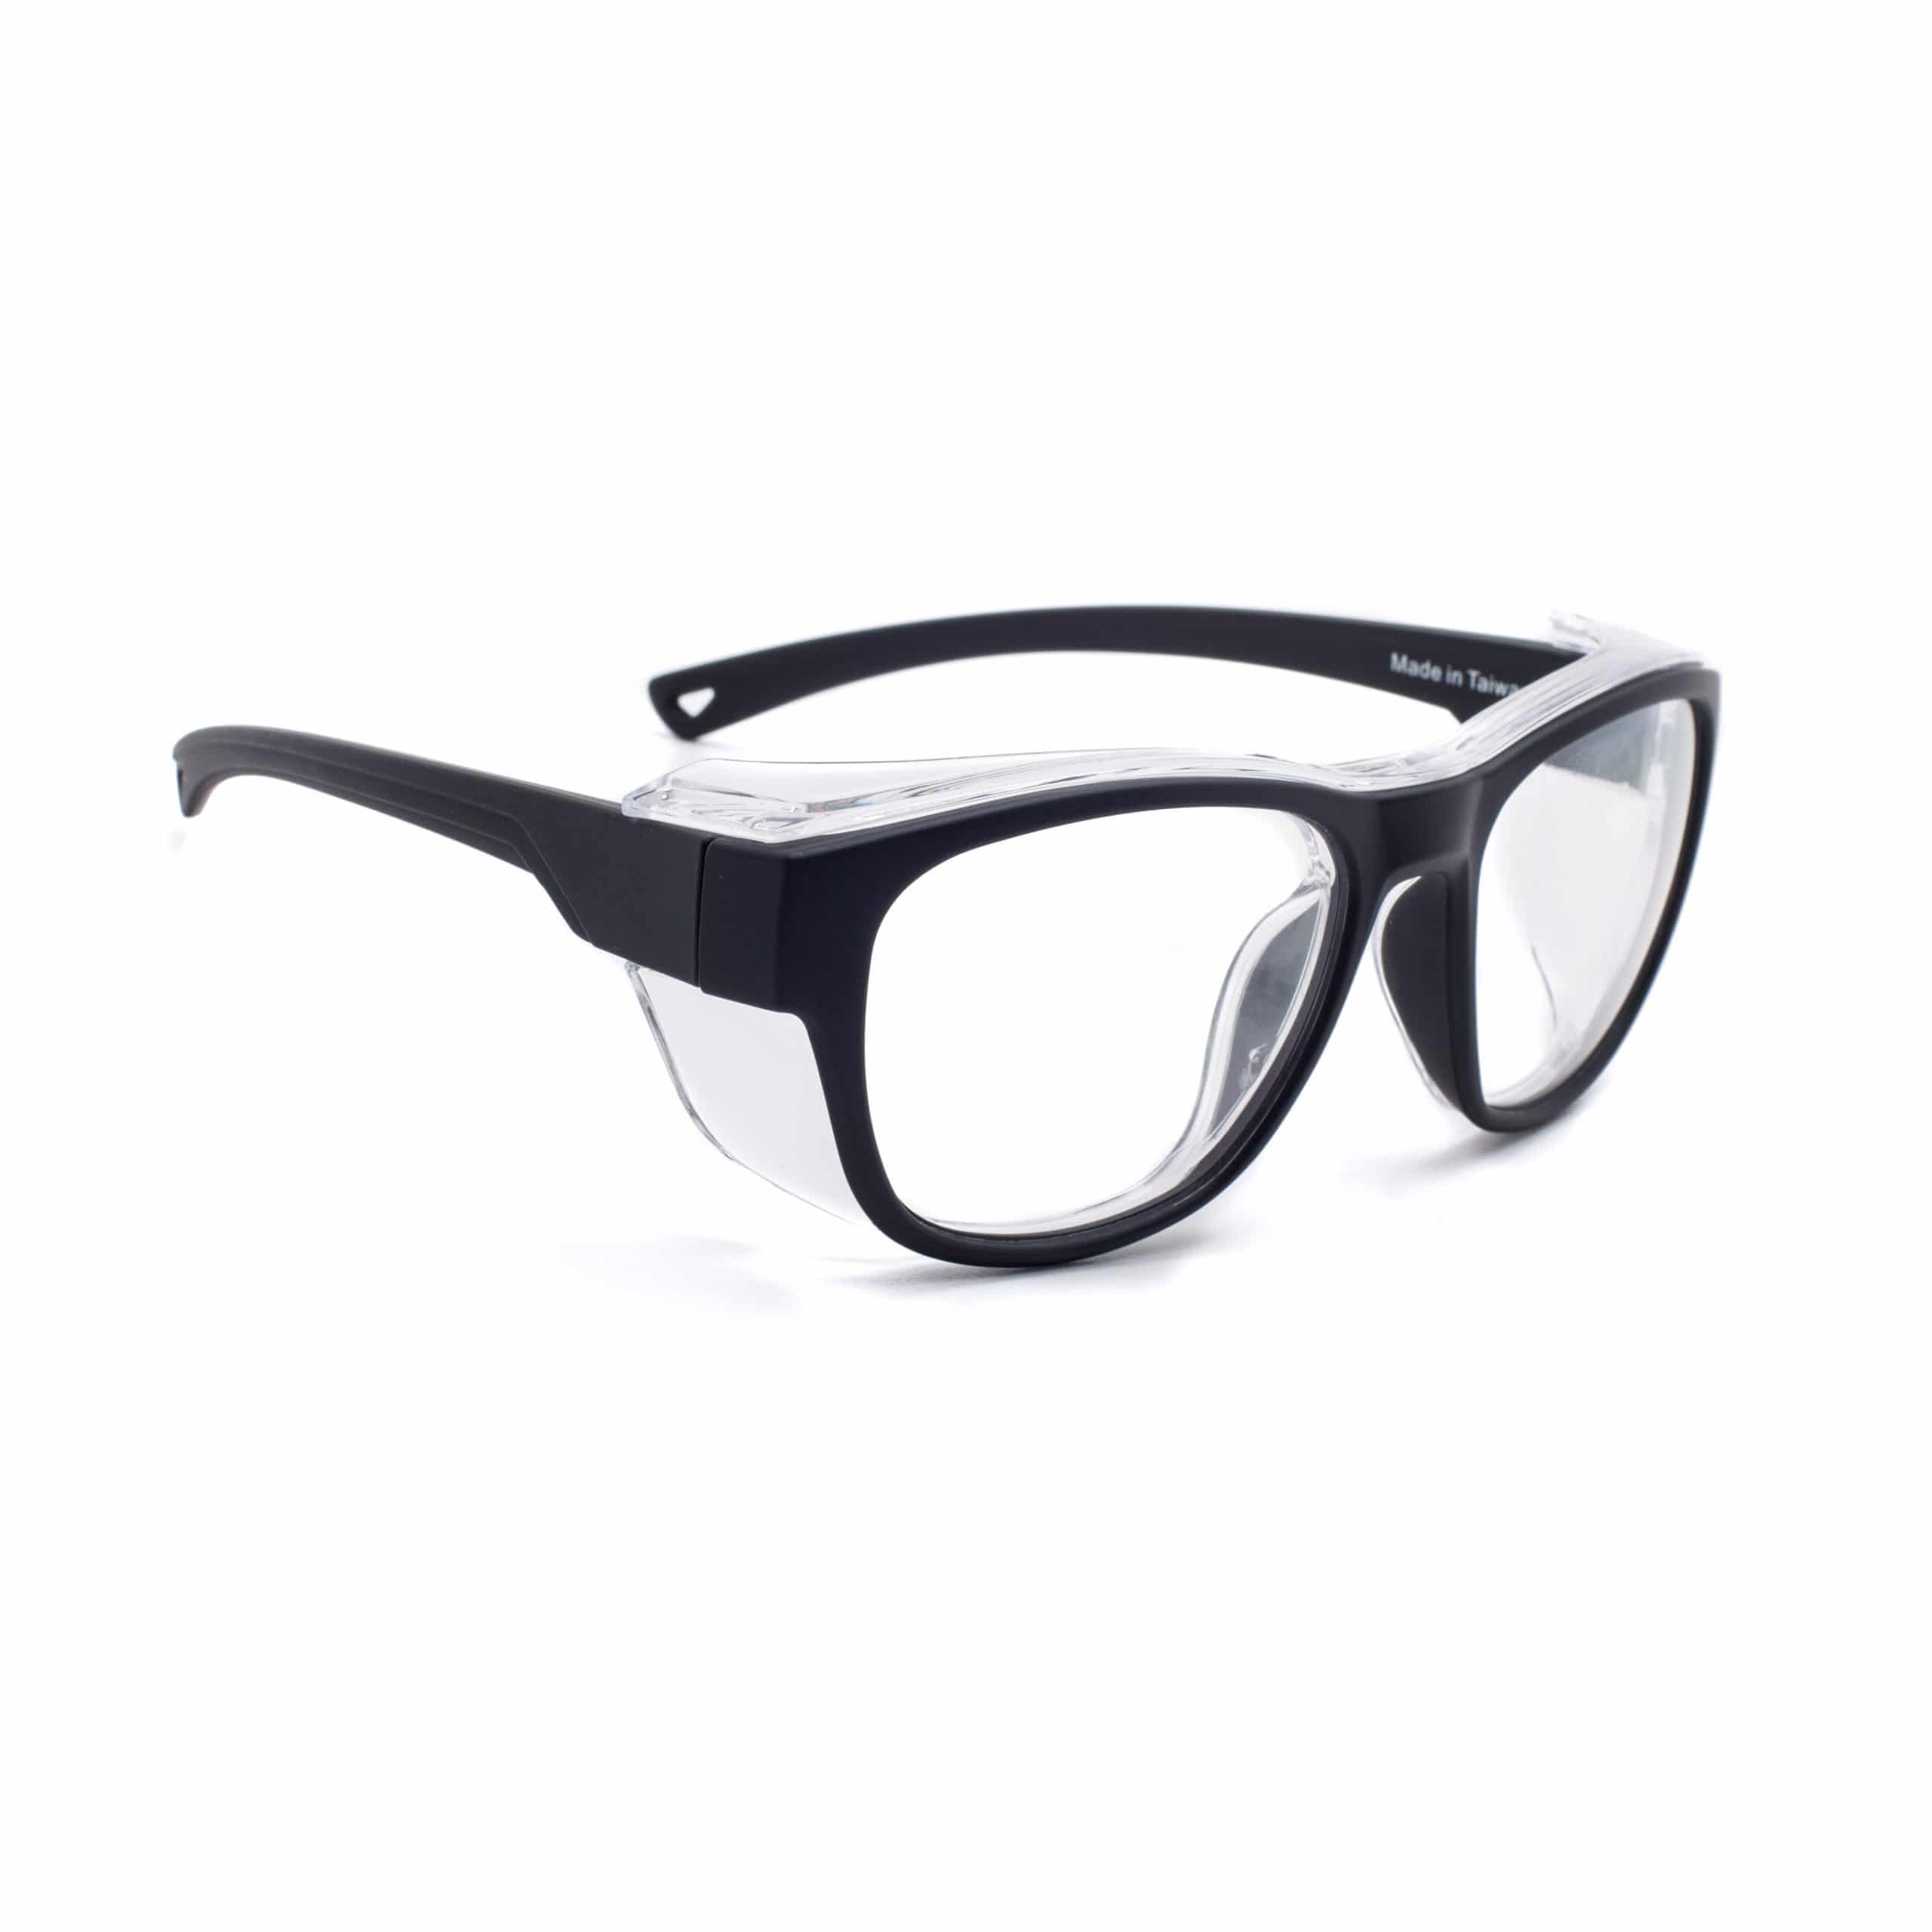 Prescription Safety Glasses Rx X26 Safety Protection Glasses